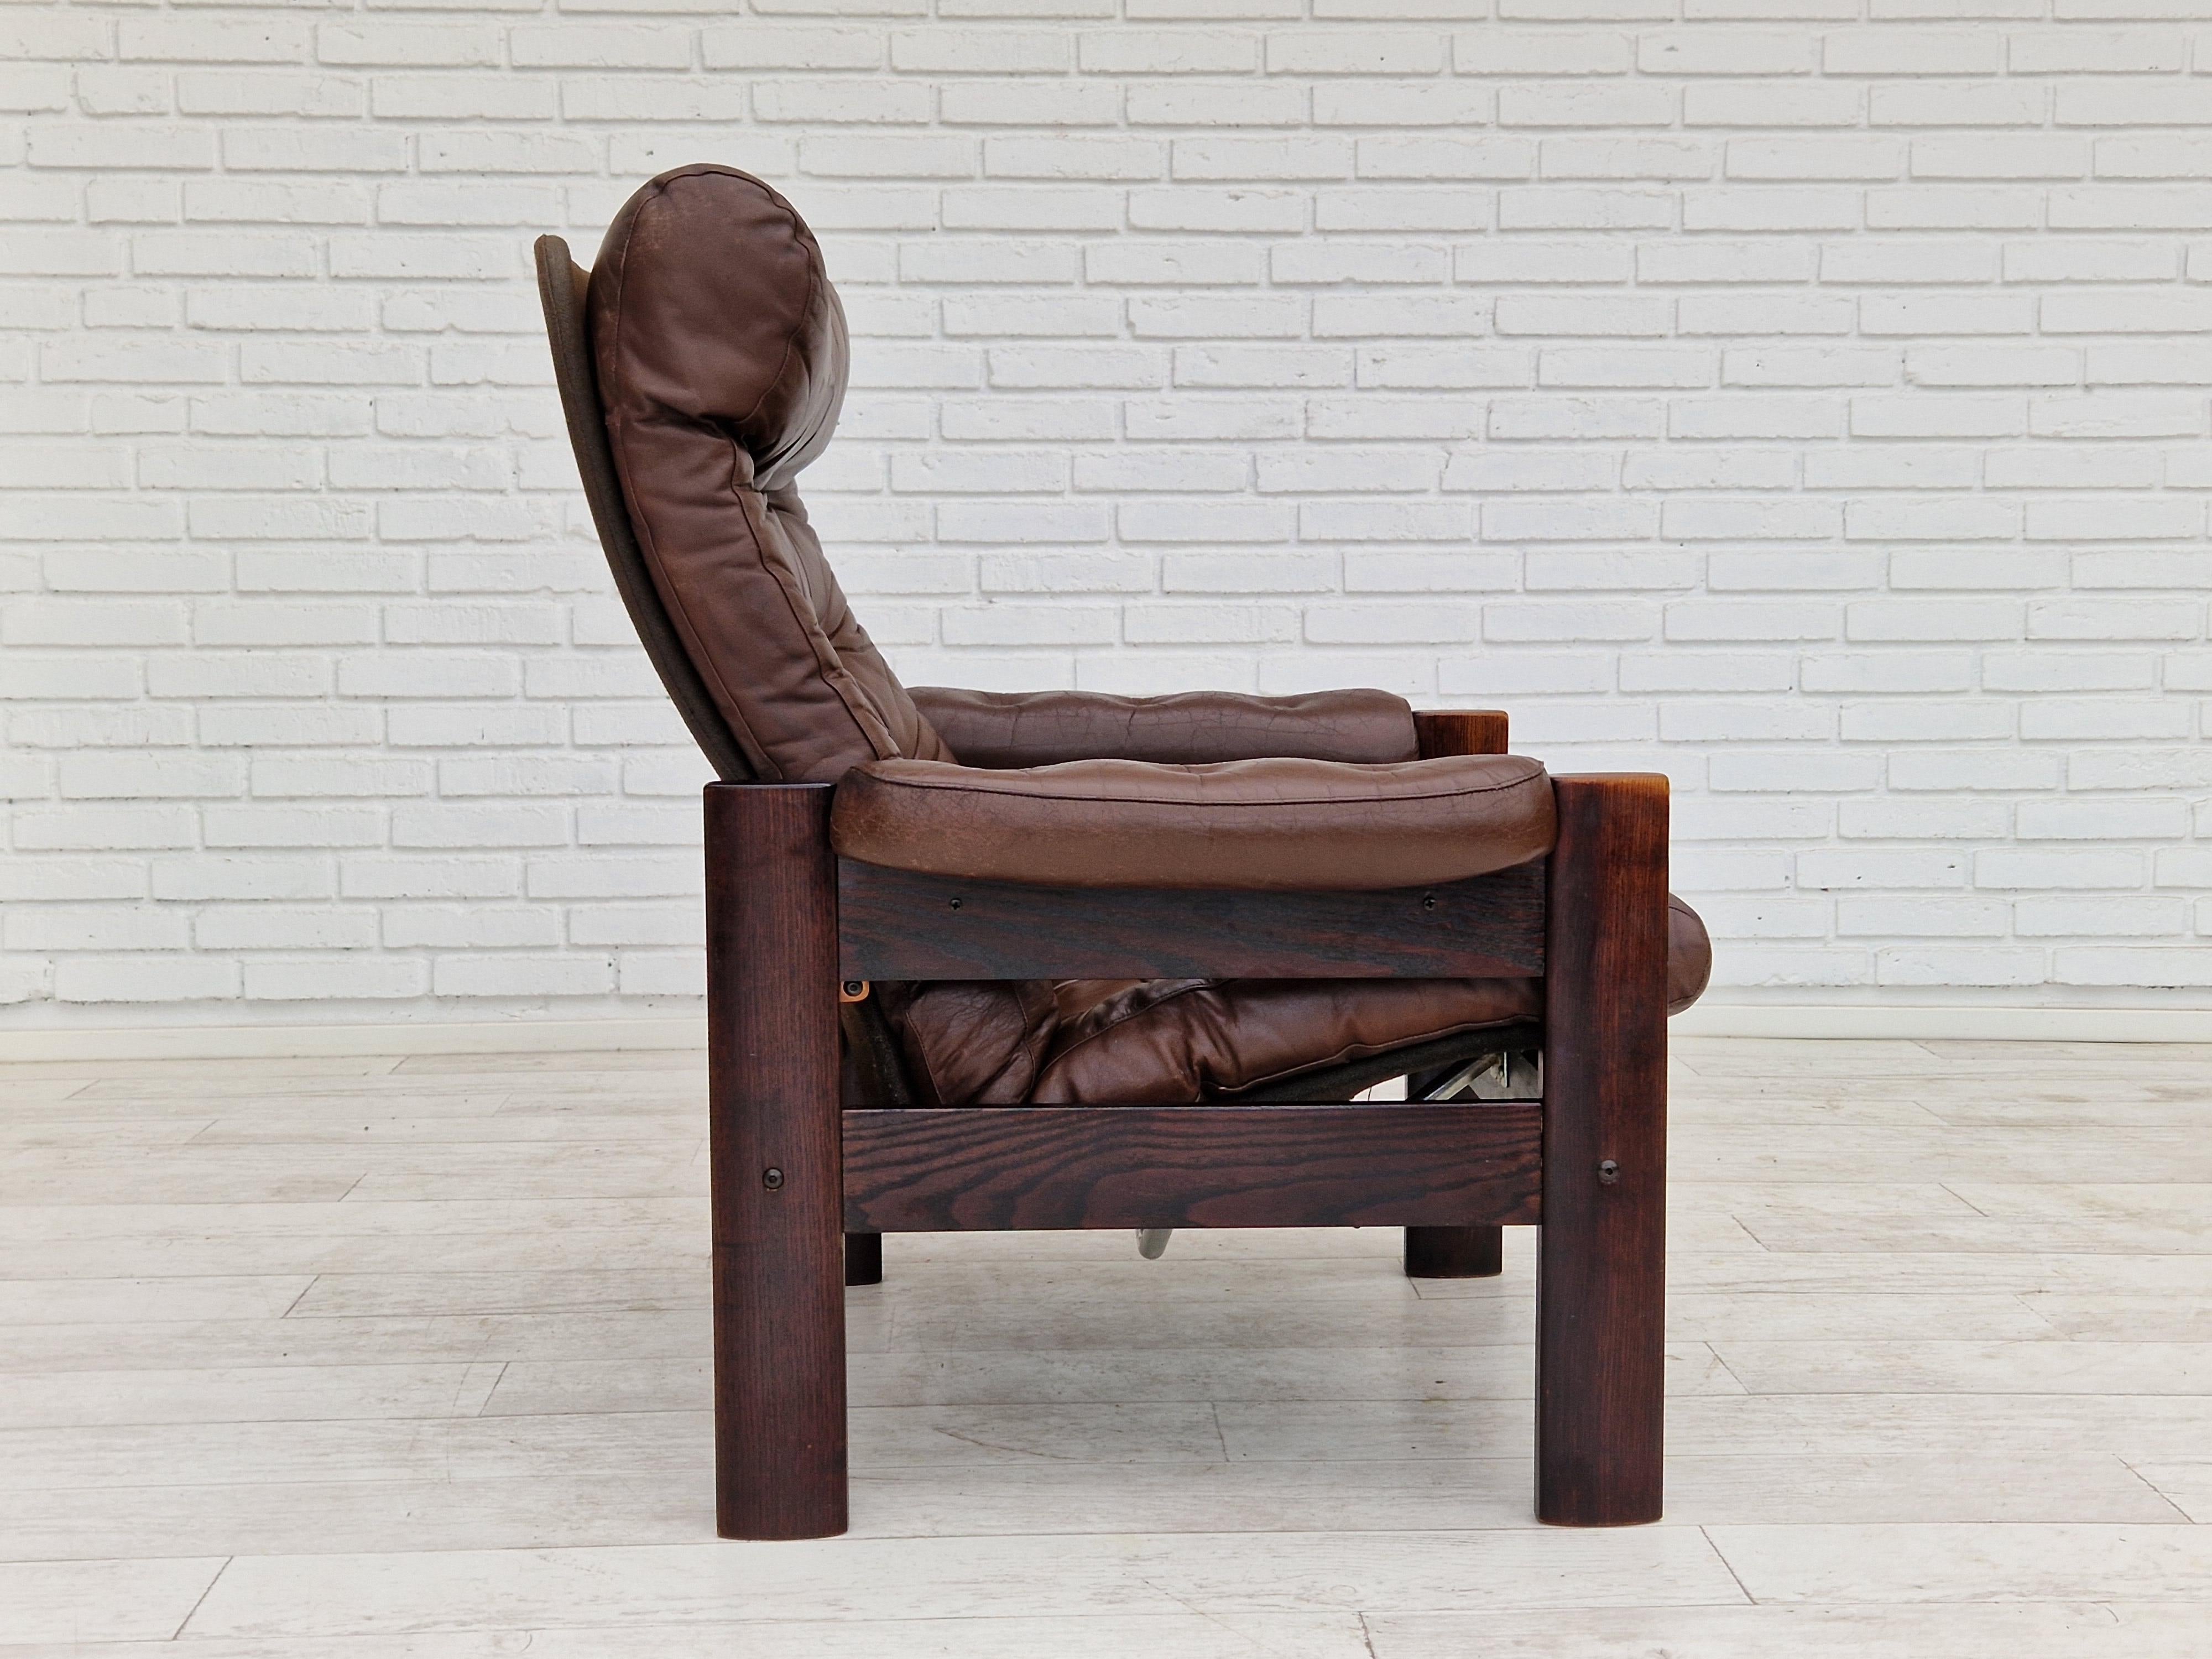 1970s, Scandinavian Adjustable Lounge Chair, Brown Leather, Oak Wood In Good Condition For Sale In Tarm, 82